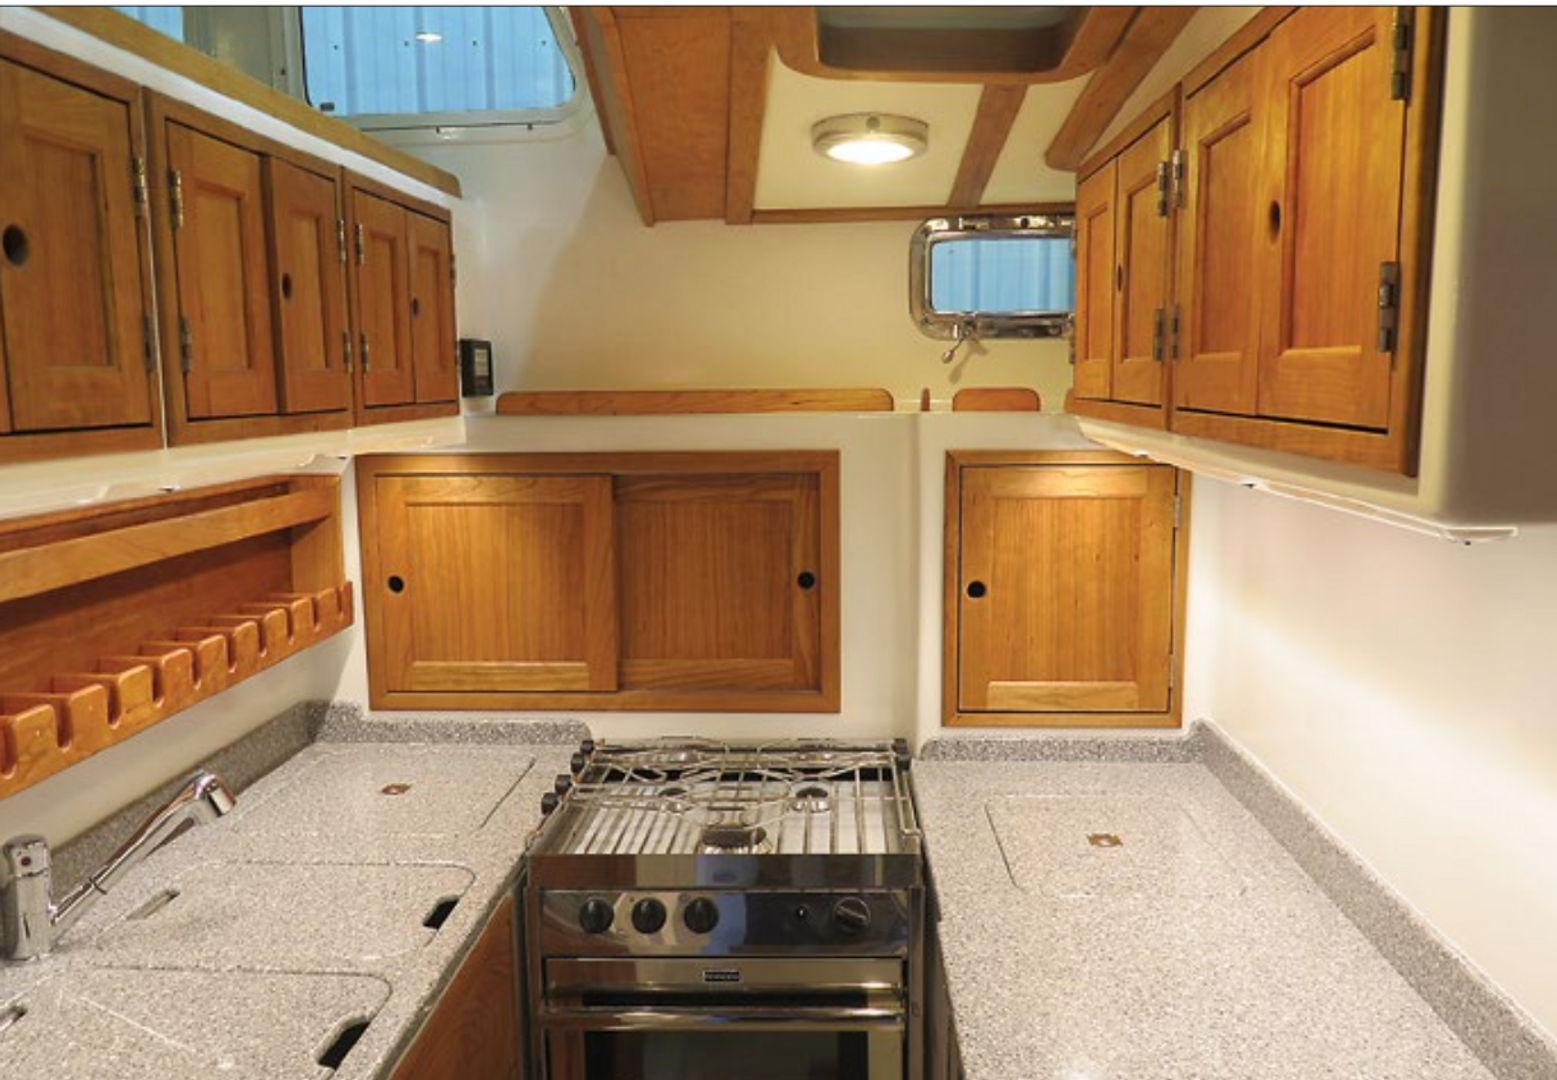 Modeled loosely on the Sigels’ earlier Valiant 40 sailboat, the finished galley space is functional, well appointed, and practical 